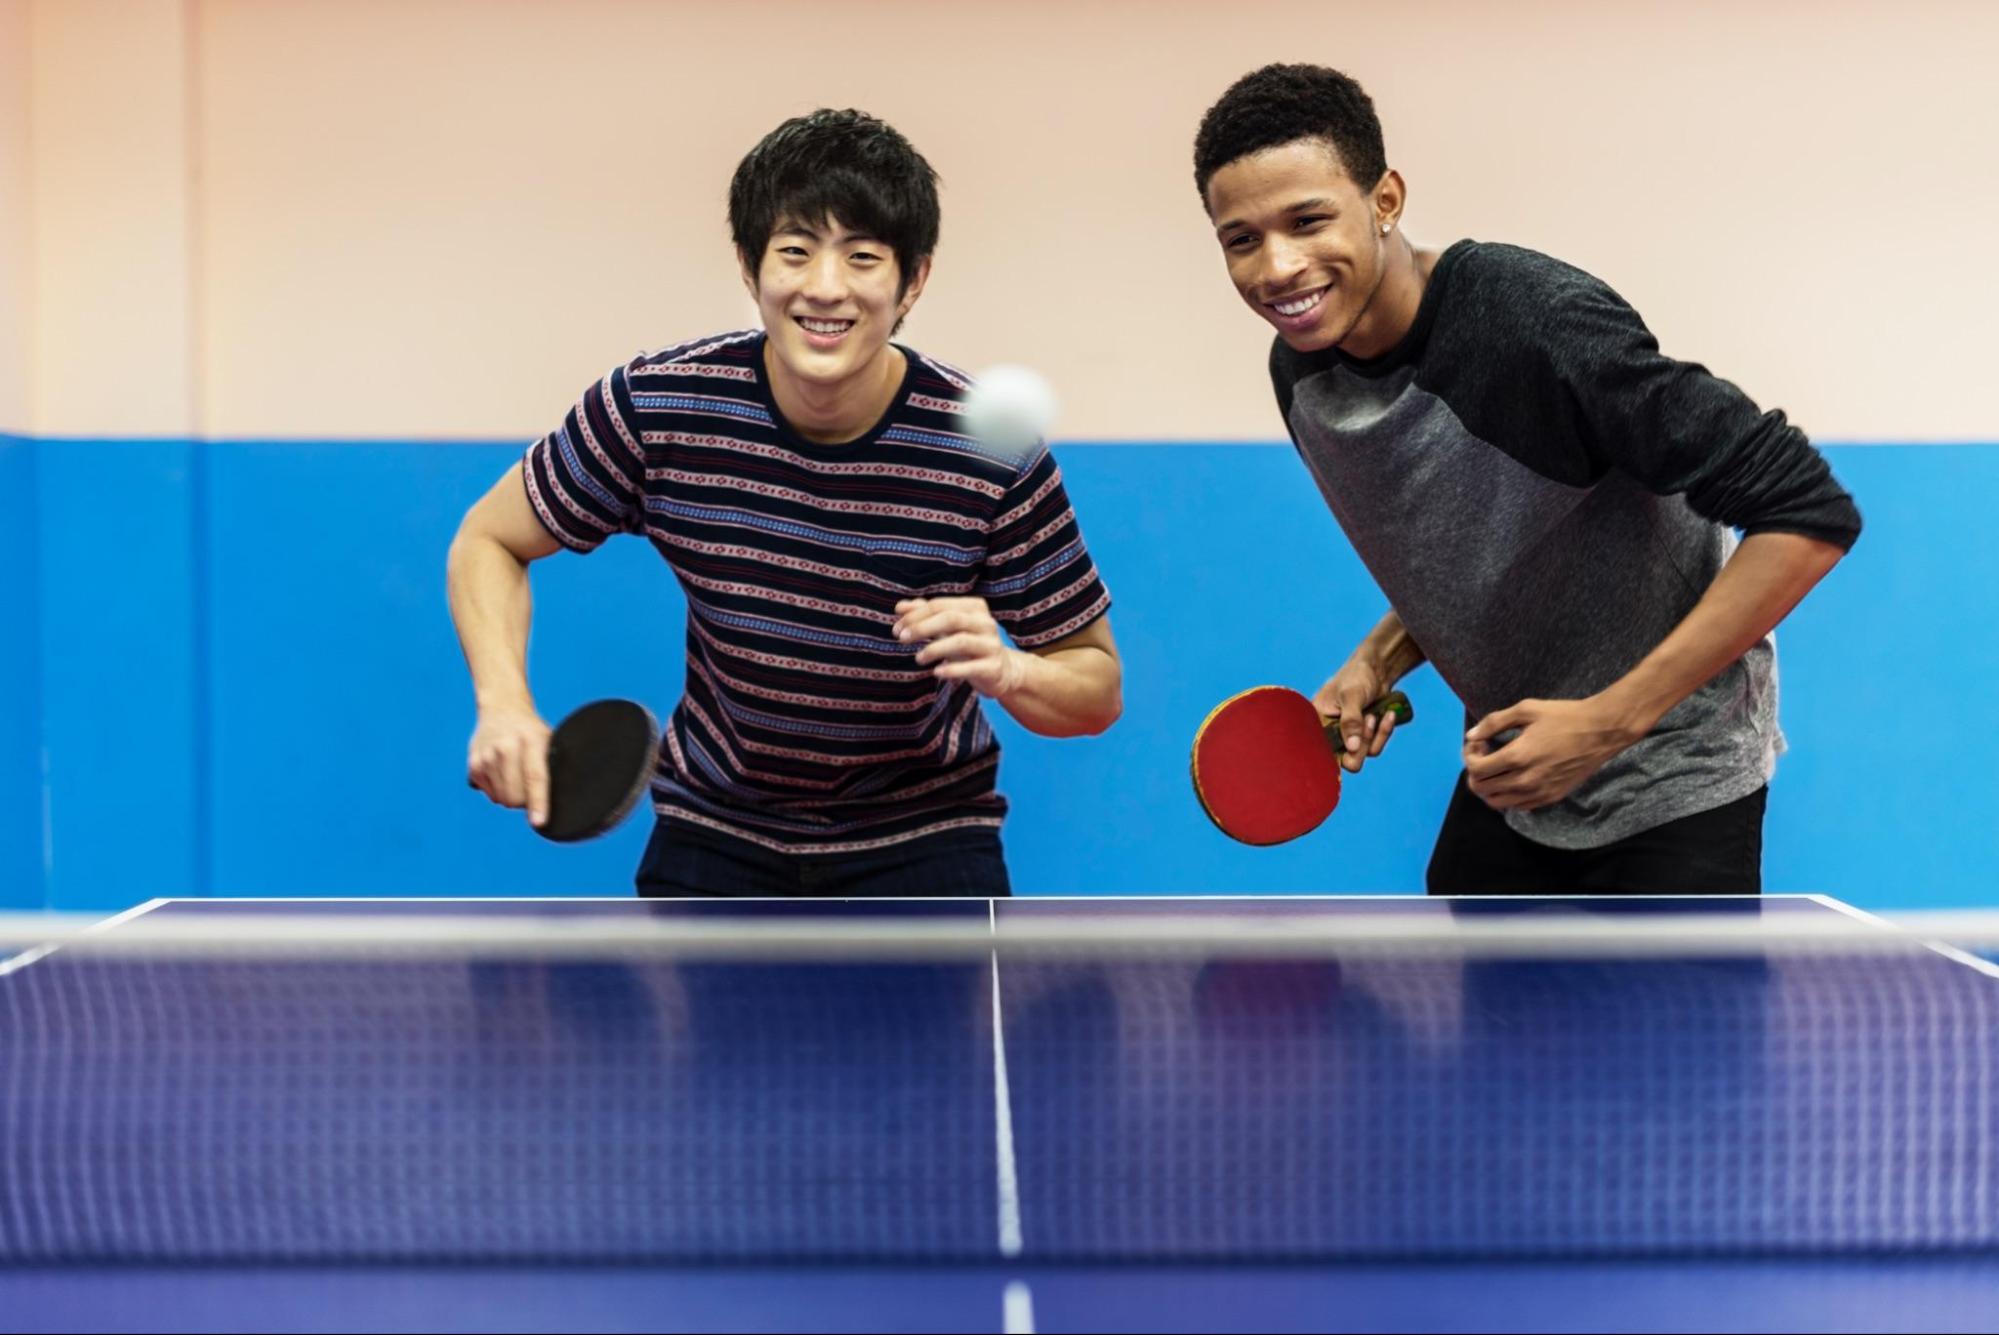 Table Tennis To Go: Play Ping-Pong on nearly any table.